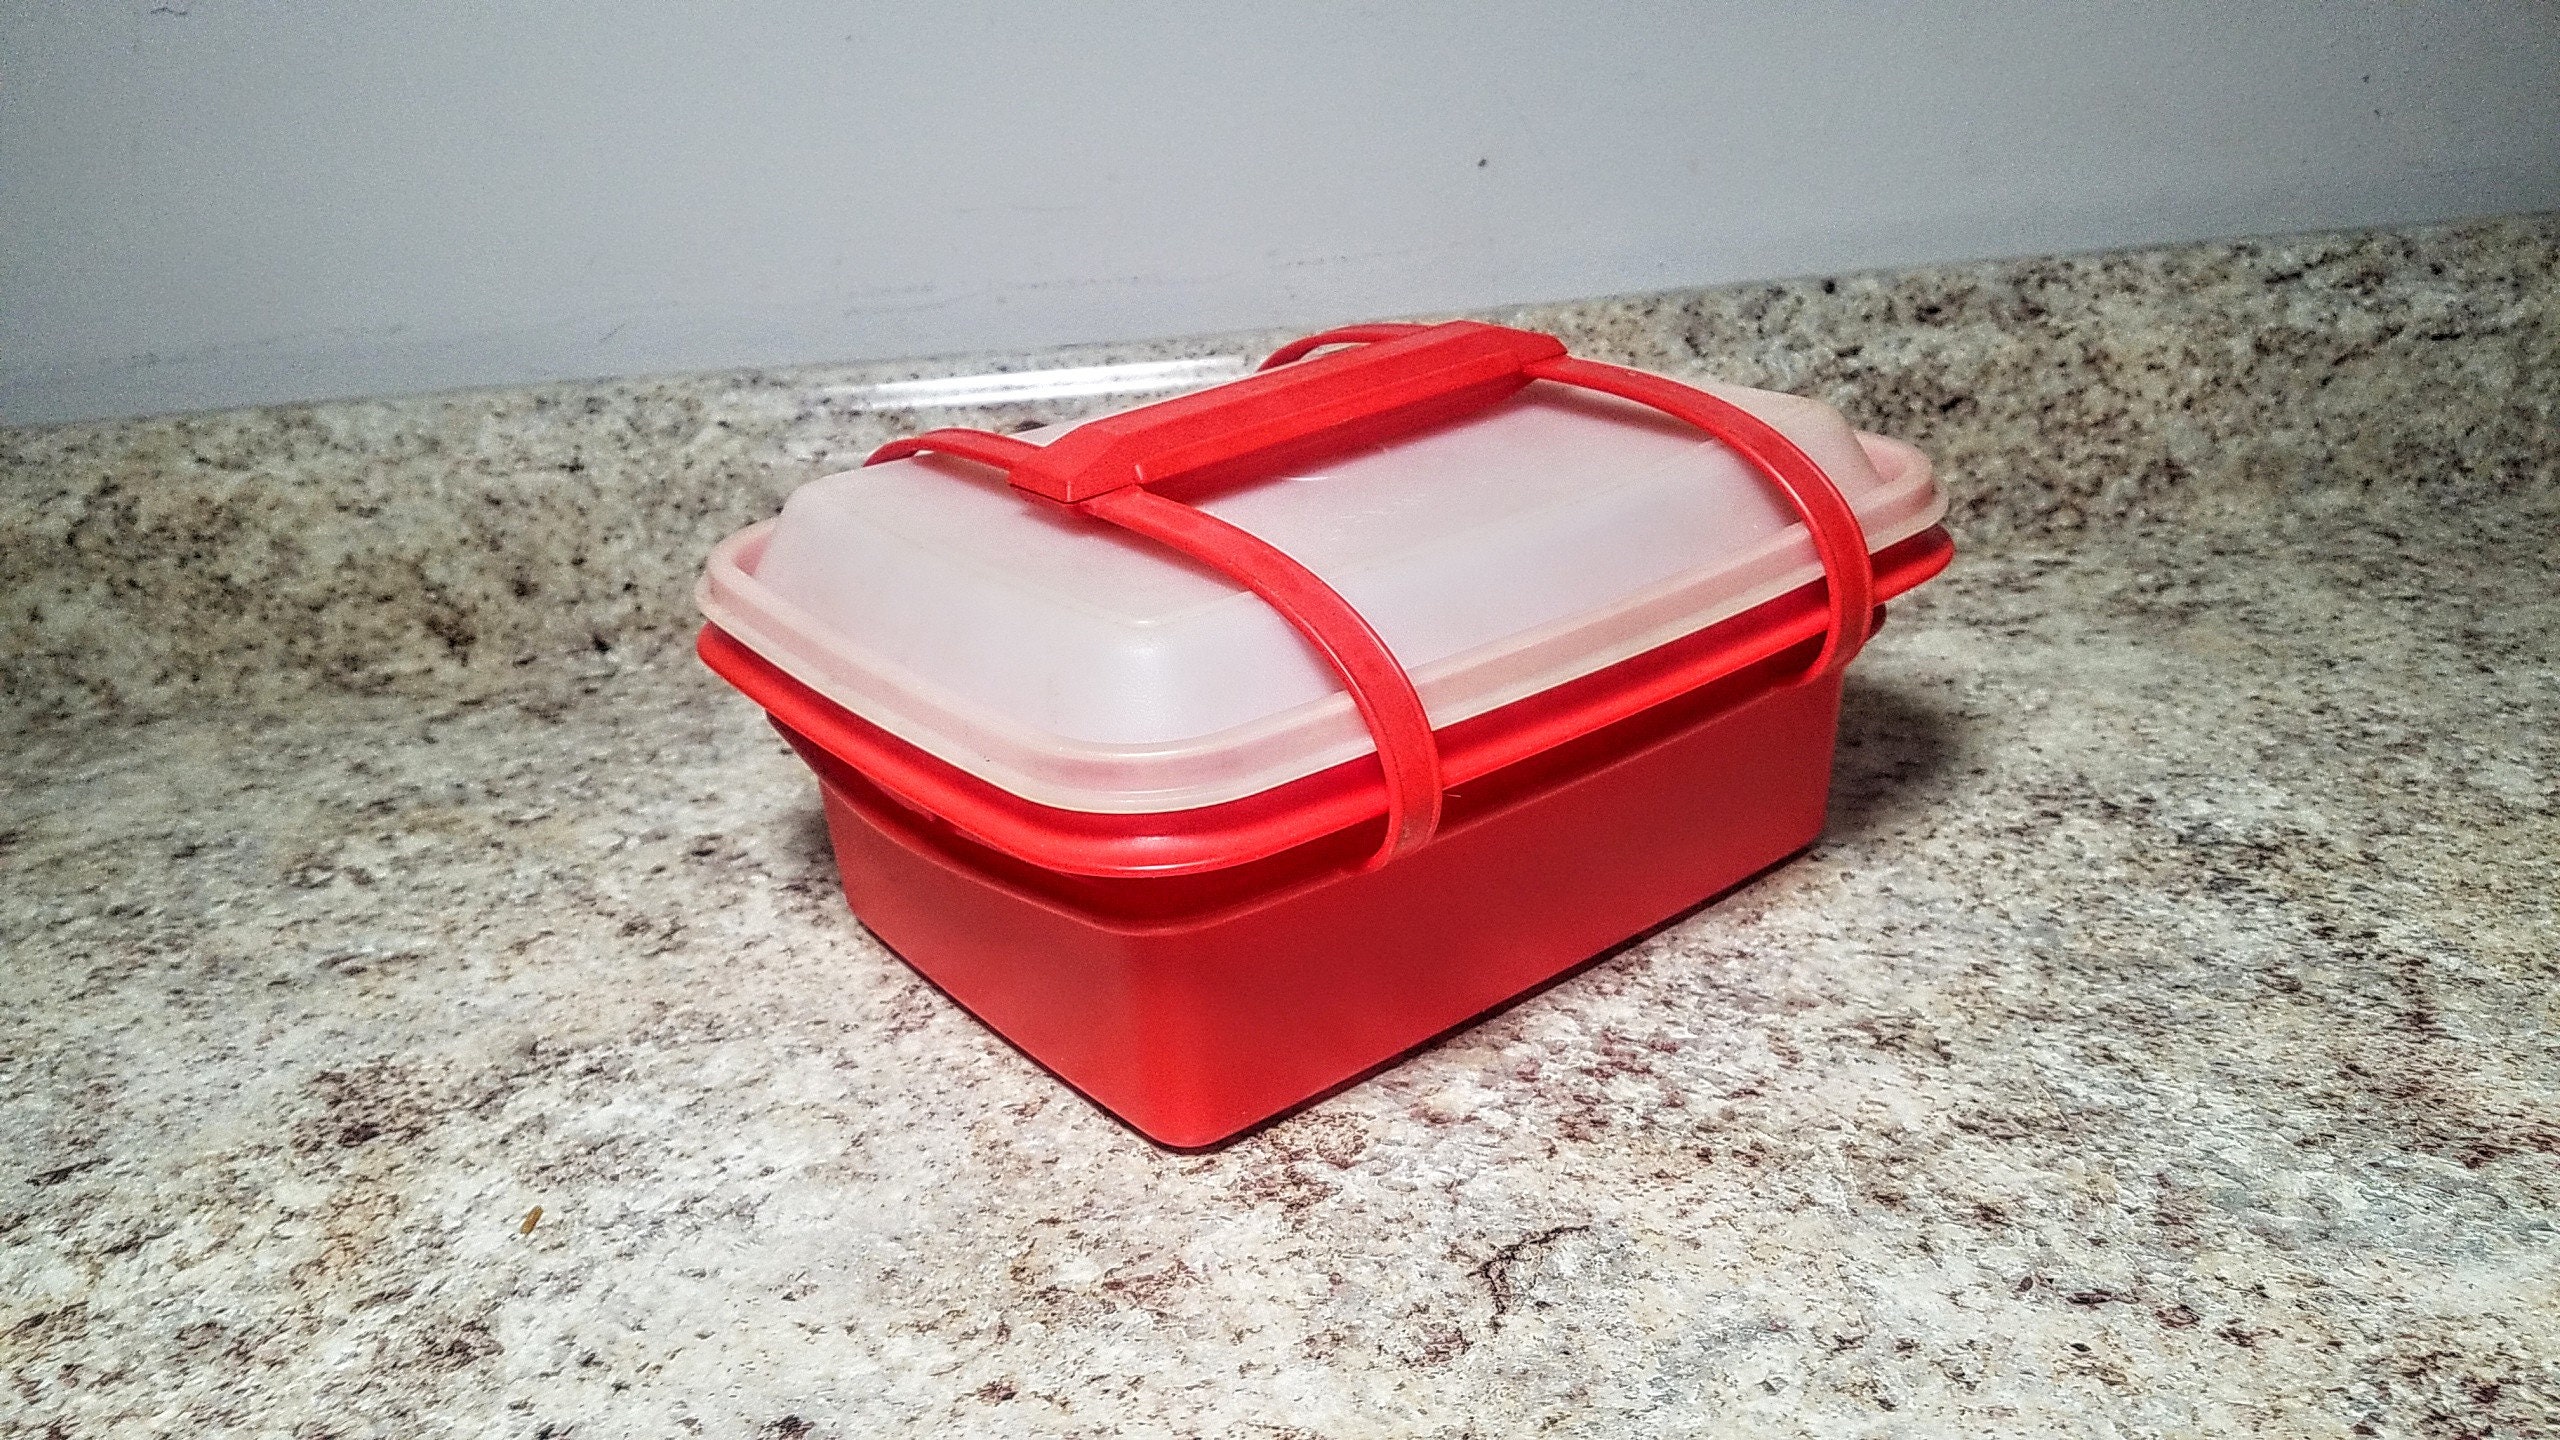 TUPPERWARE 3 PIZZA Slice Keep-N-Heat Keeper Storage Containers Teal $25.99  - PicClick